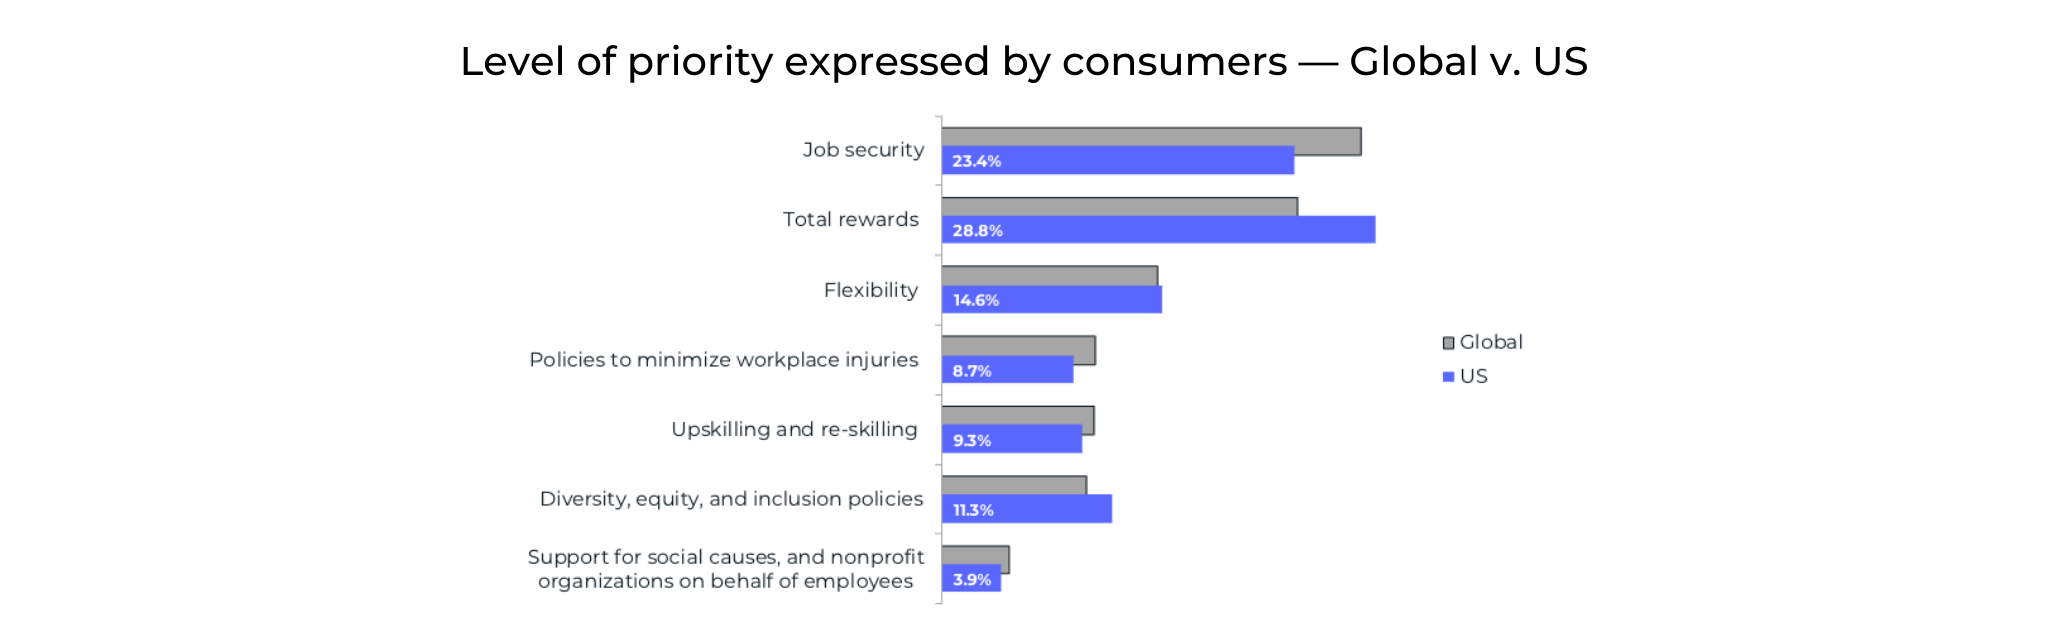 Level of priority expressed by consumers Global v US